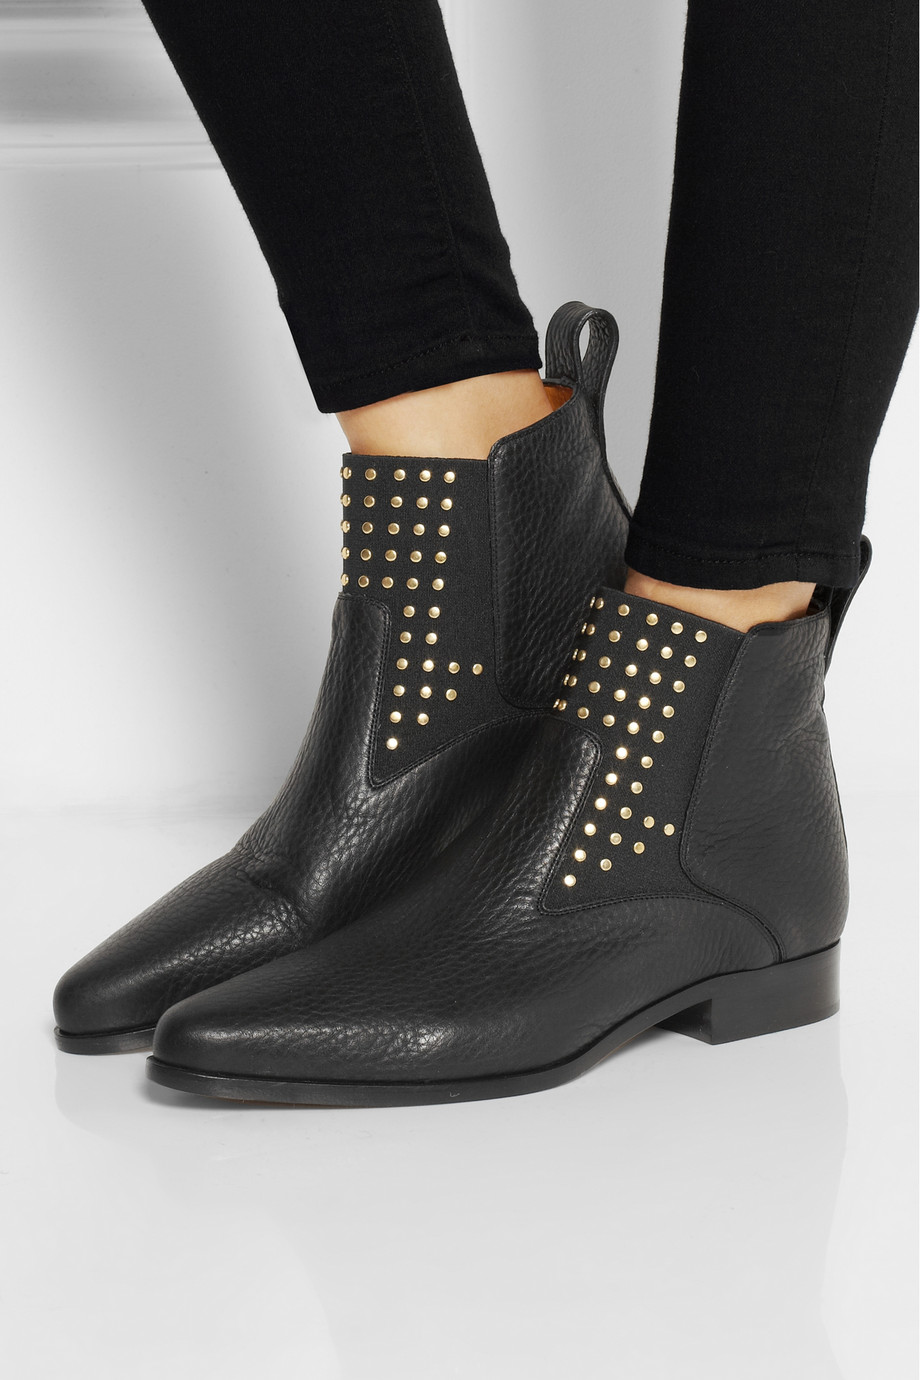 Obsessed: Chloe Studded Ankle Boots